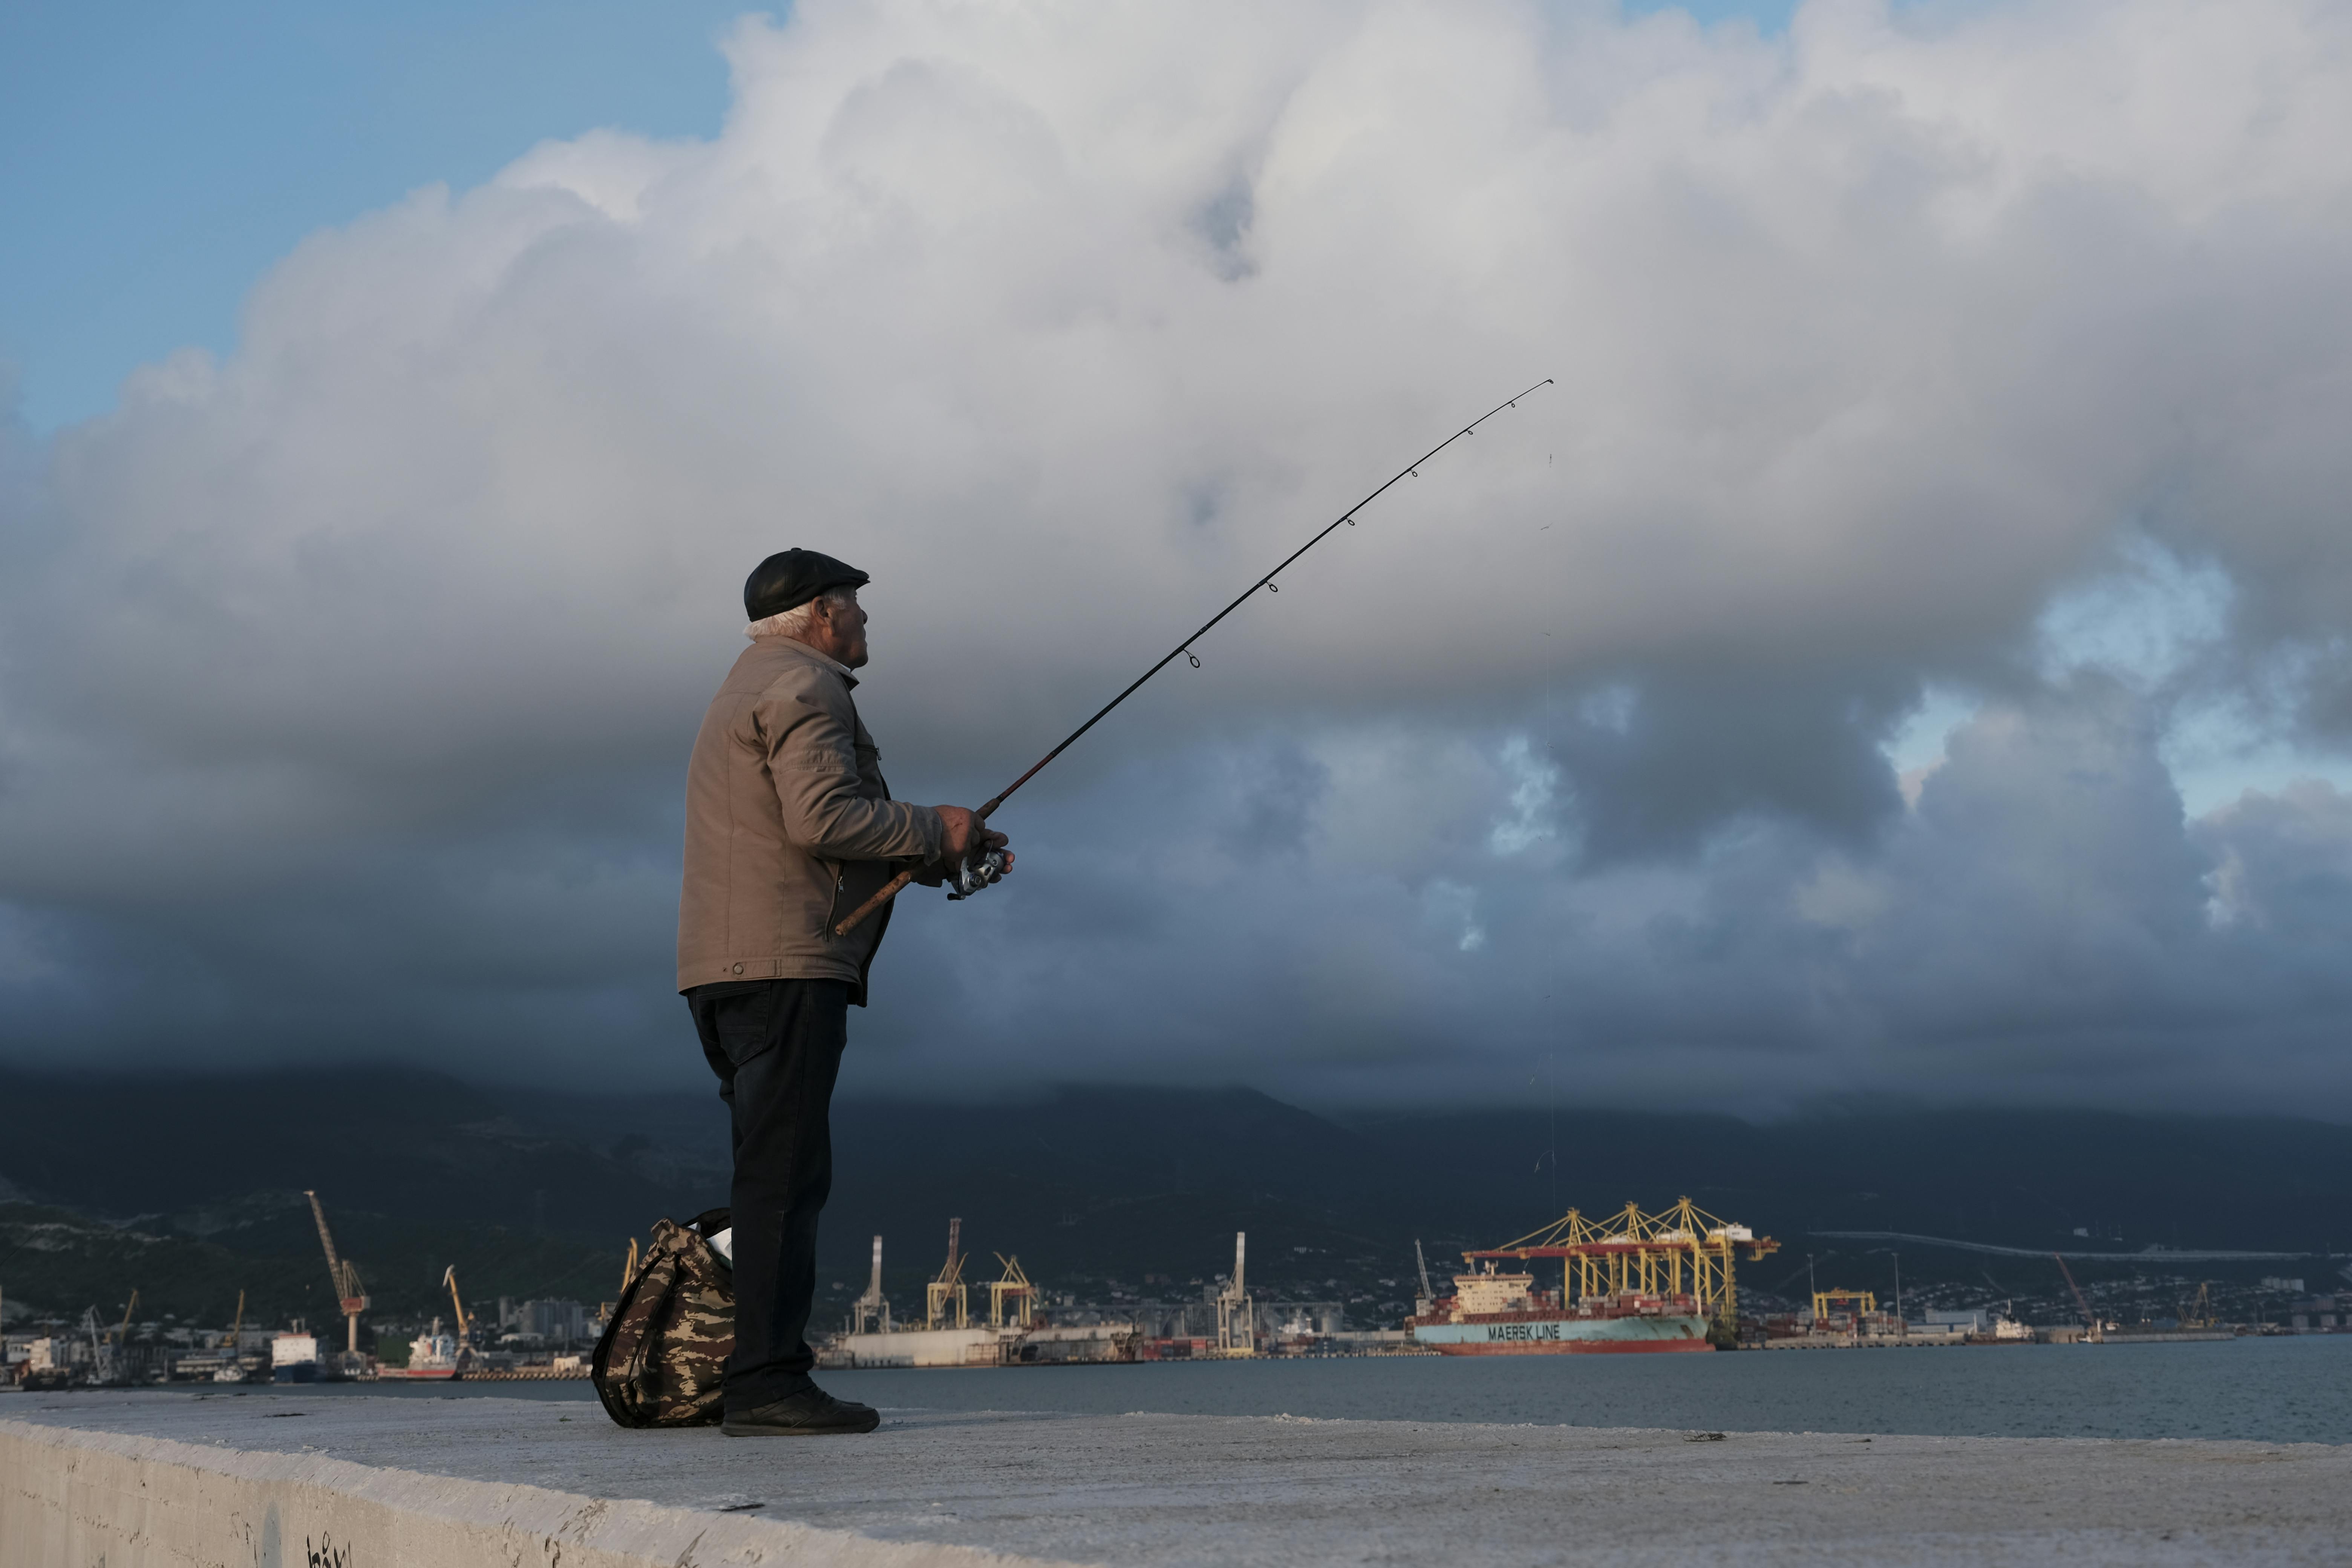 Man in a Jacket and Black Pants Fishing · Free Stock Photo